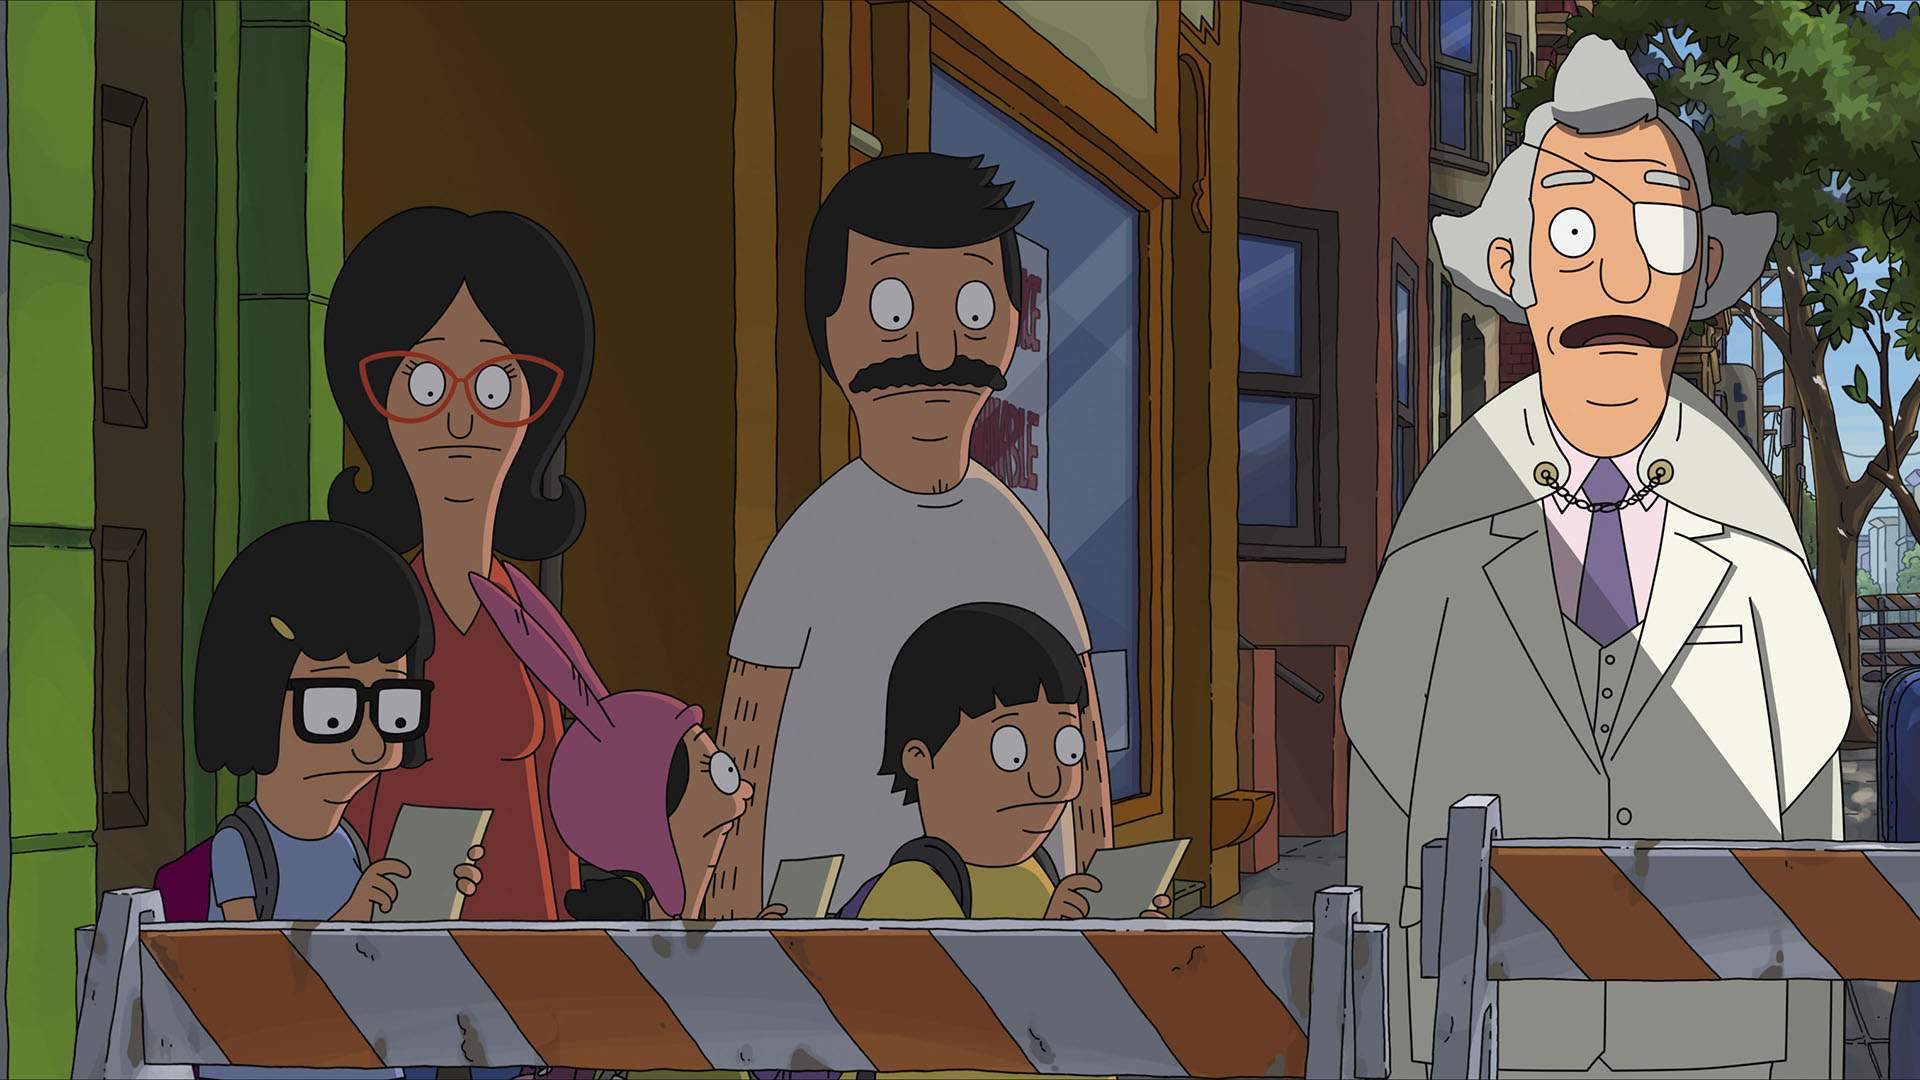 The Latest Trailer for 'The Bob's Burgers Movie' Is Here with Meat, Mayhem and Glorious Burg Puns